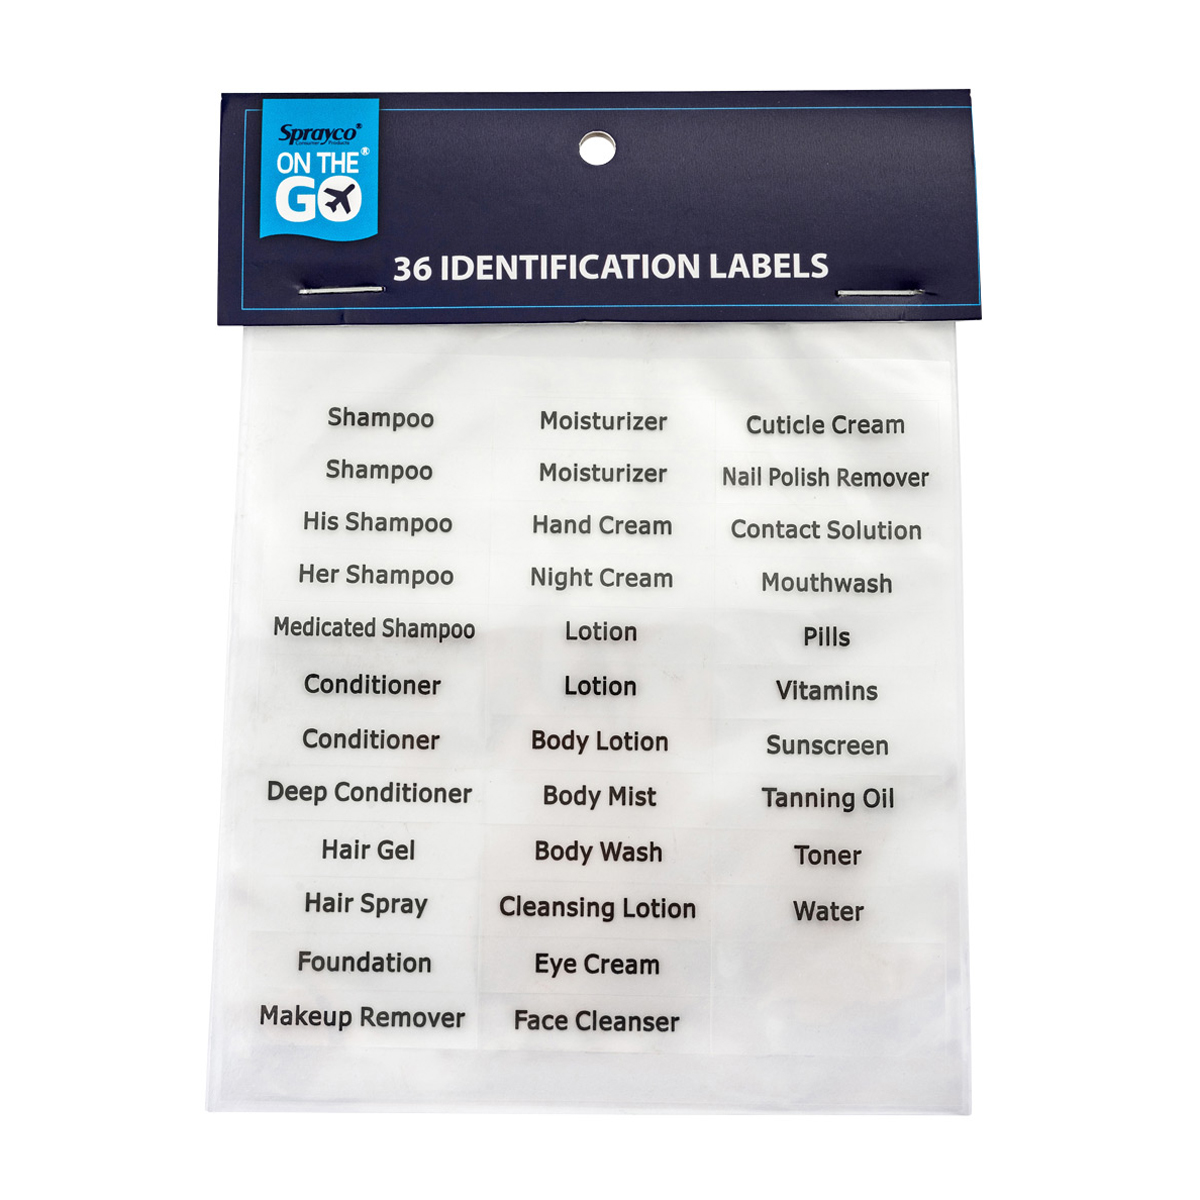 Custom Craft Labels. Printed Craft Labels. Hobby Labels